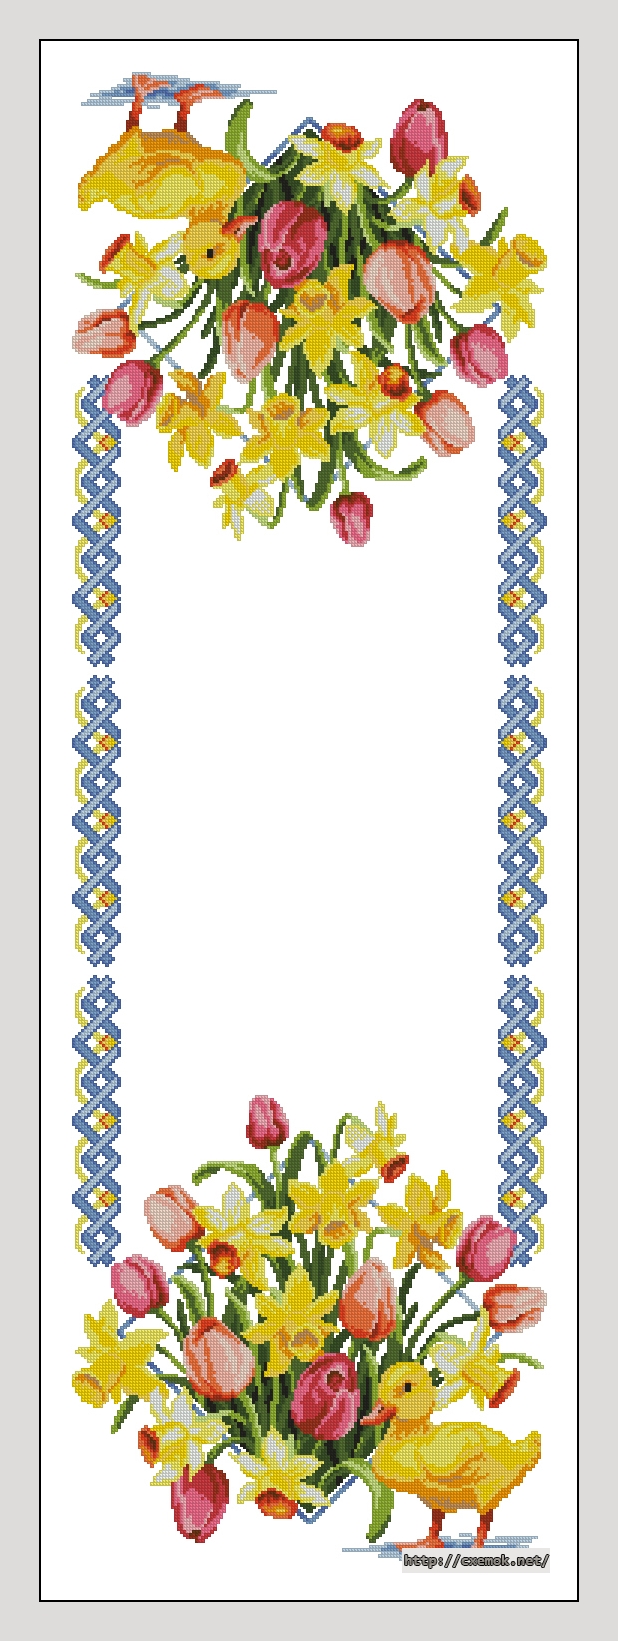 Download embroidery patterns by cross-stitch  - Рушник пасхальный